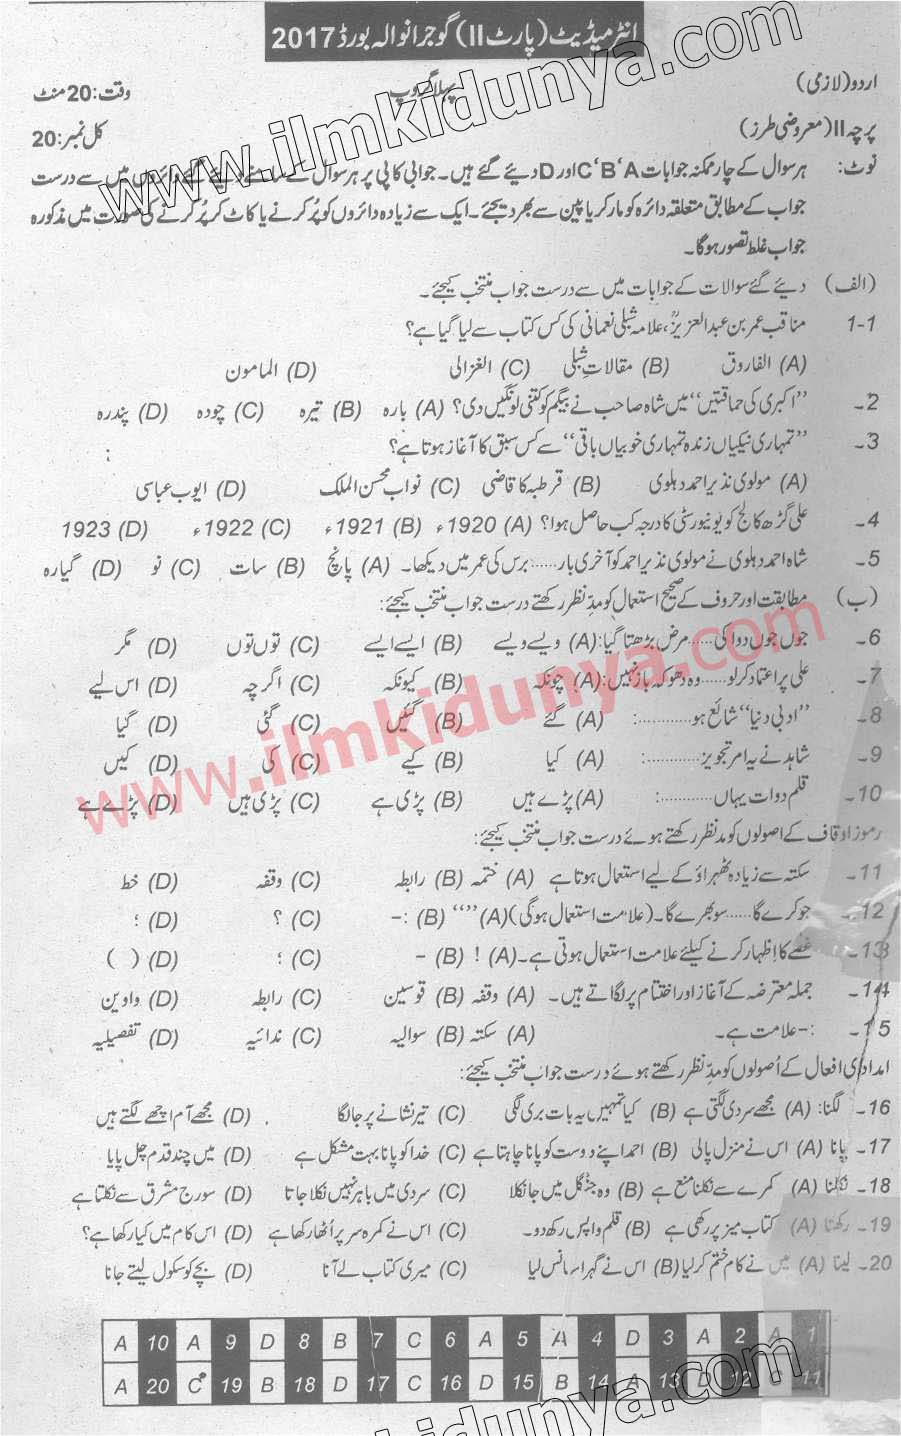 chemistry notes for 1st year abbottabad board